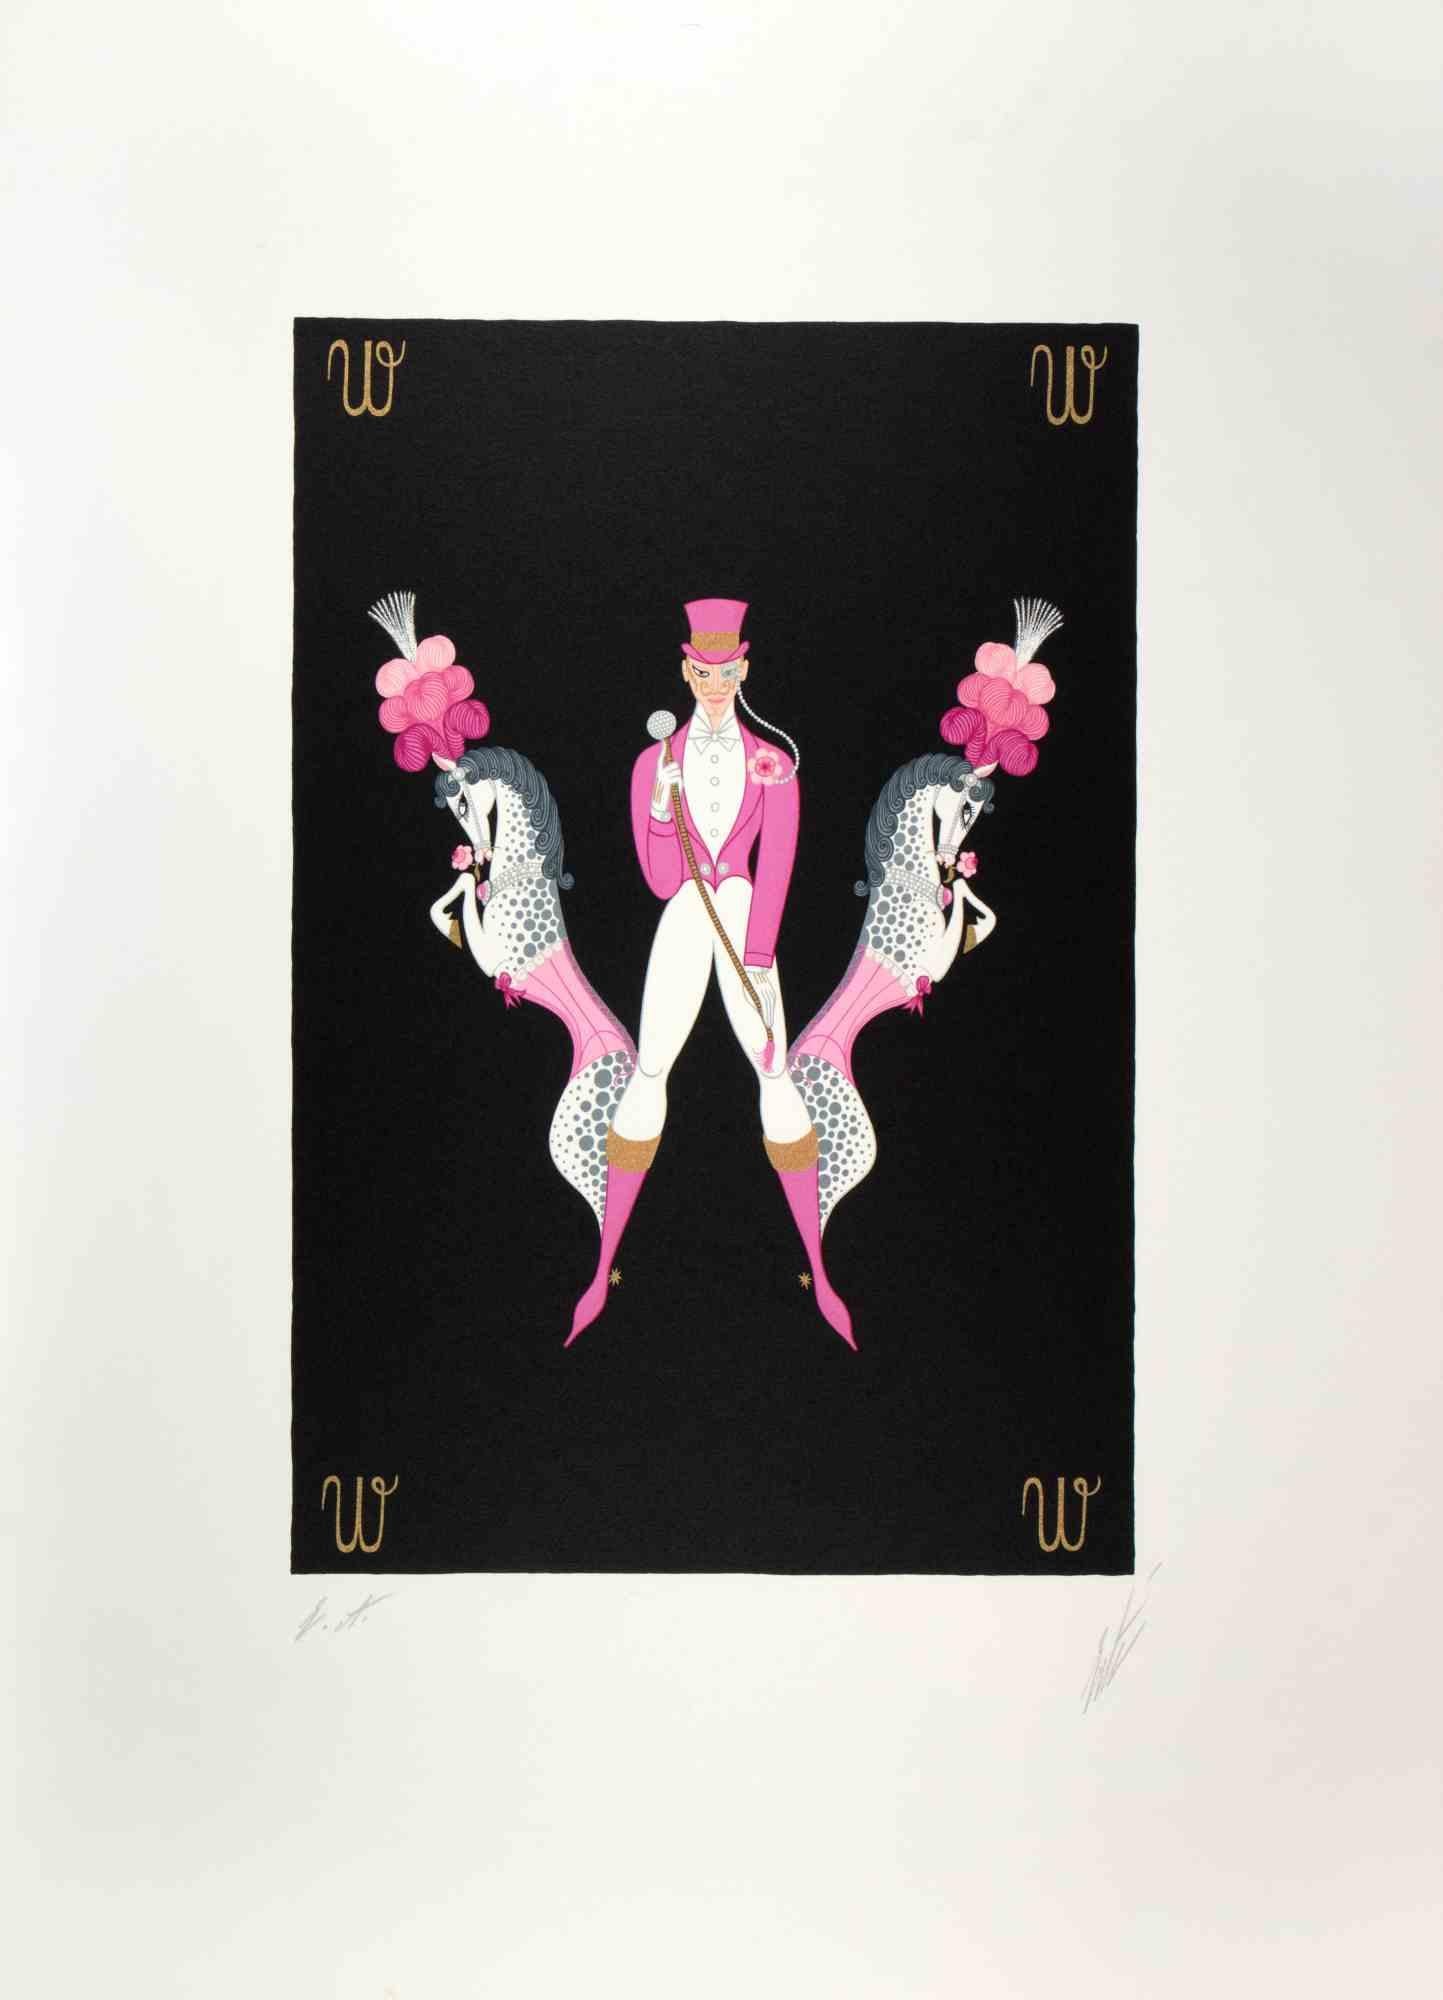 Letter W - from the suite Letters of the Alphabet is a contemporary artwork realized by Erté (Romain de Tirtoff).

Lithograph and Screen Print.

The artwork is from the suite "Letters of the Alphabet", 1976.

Hand signed on the lower margin. Artist